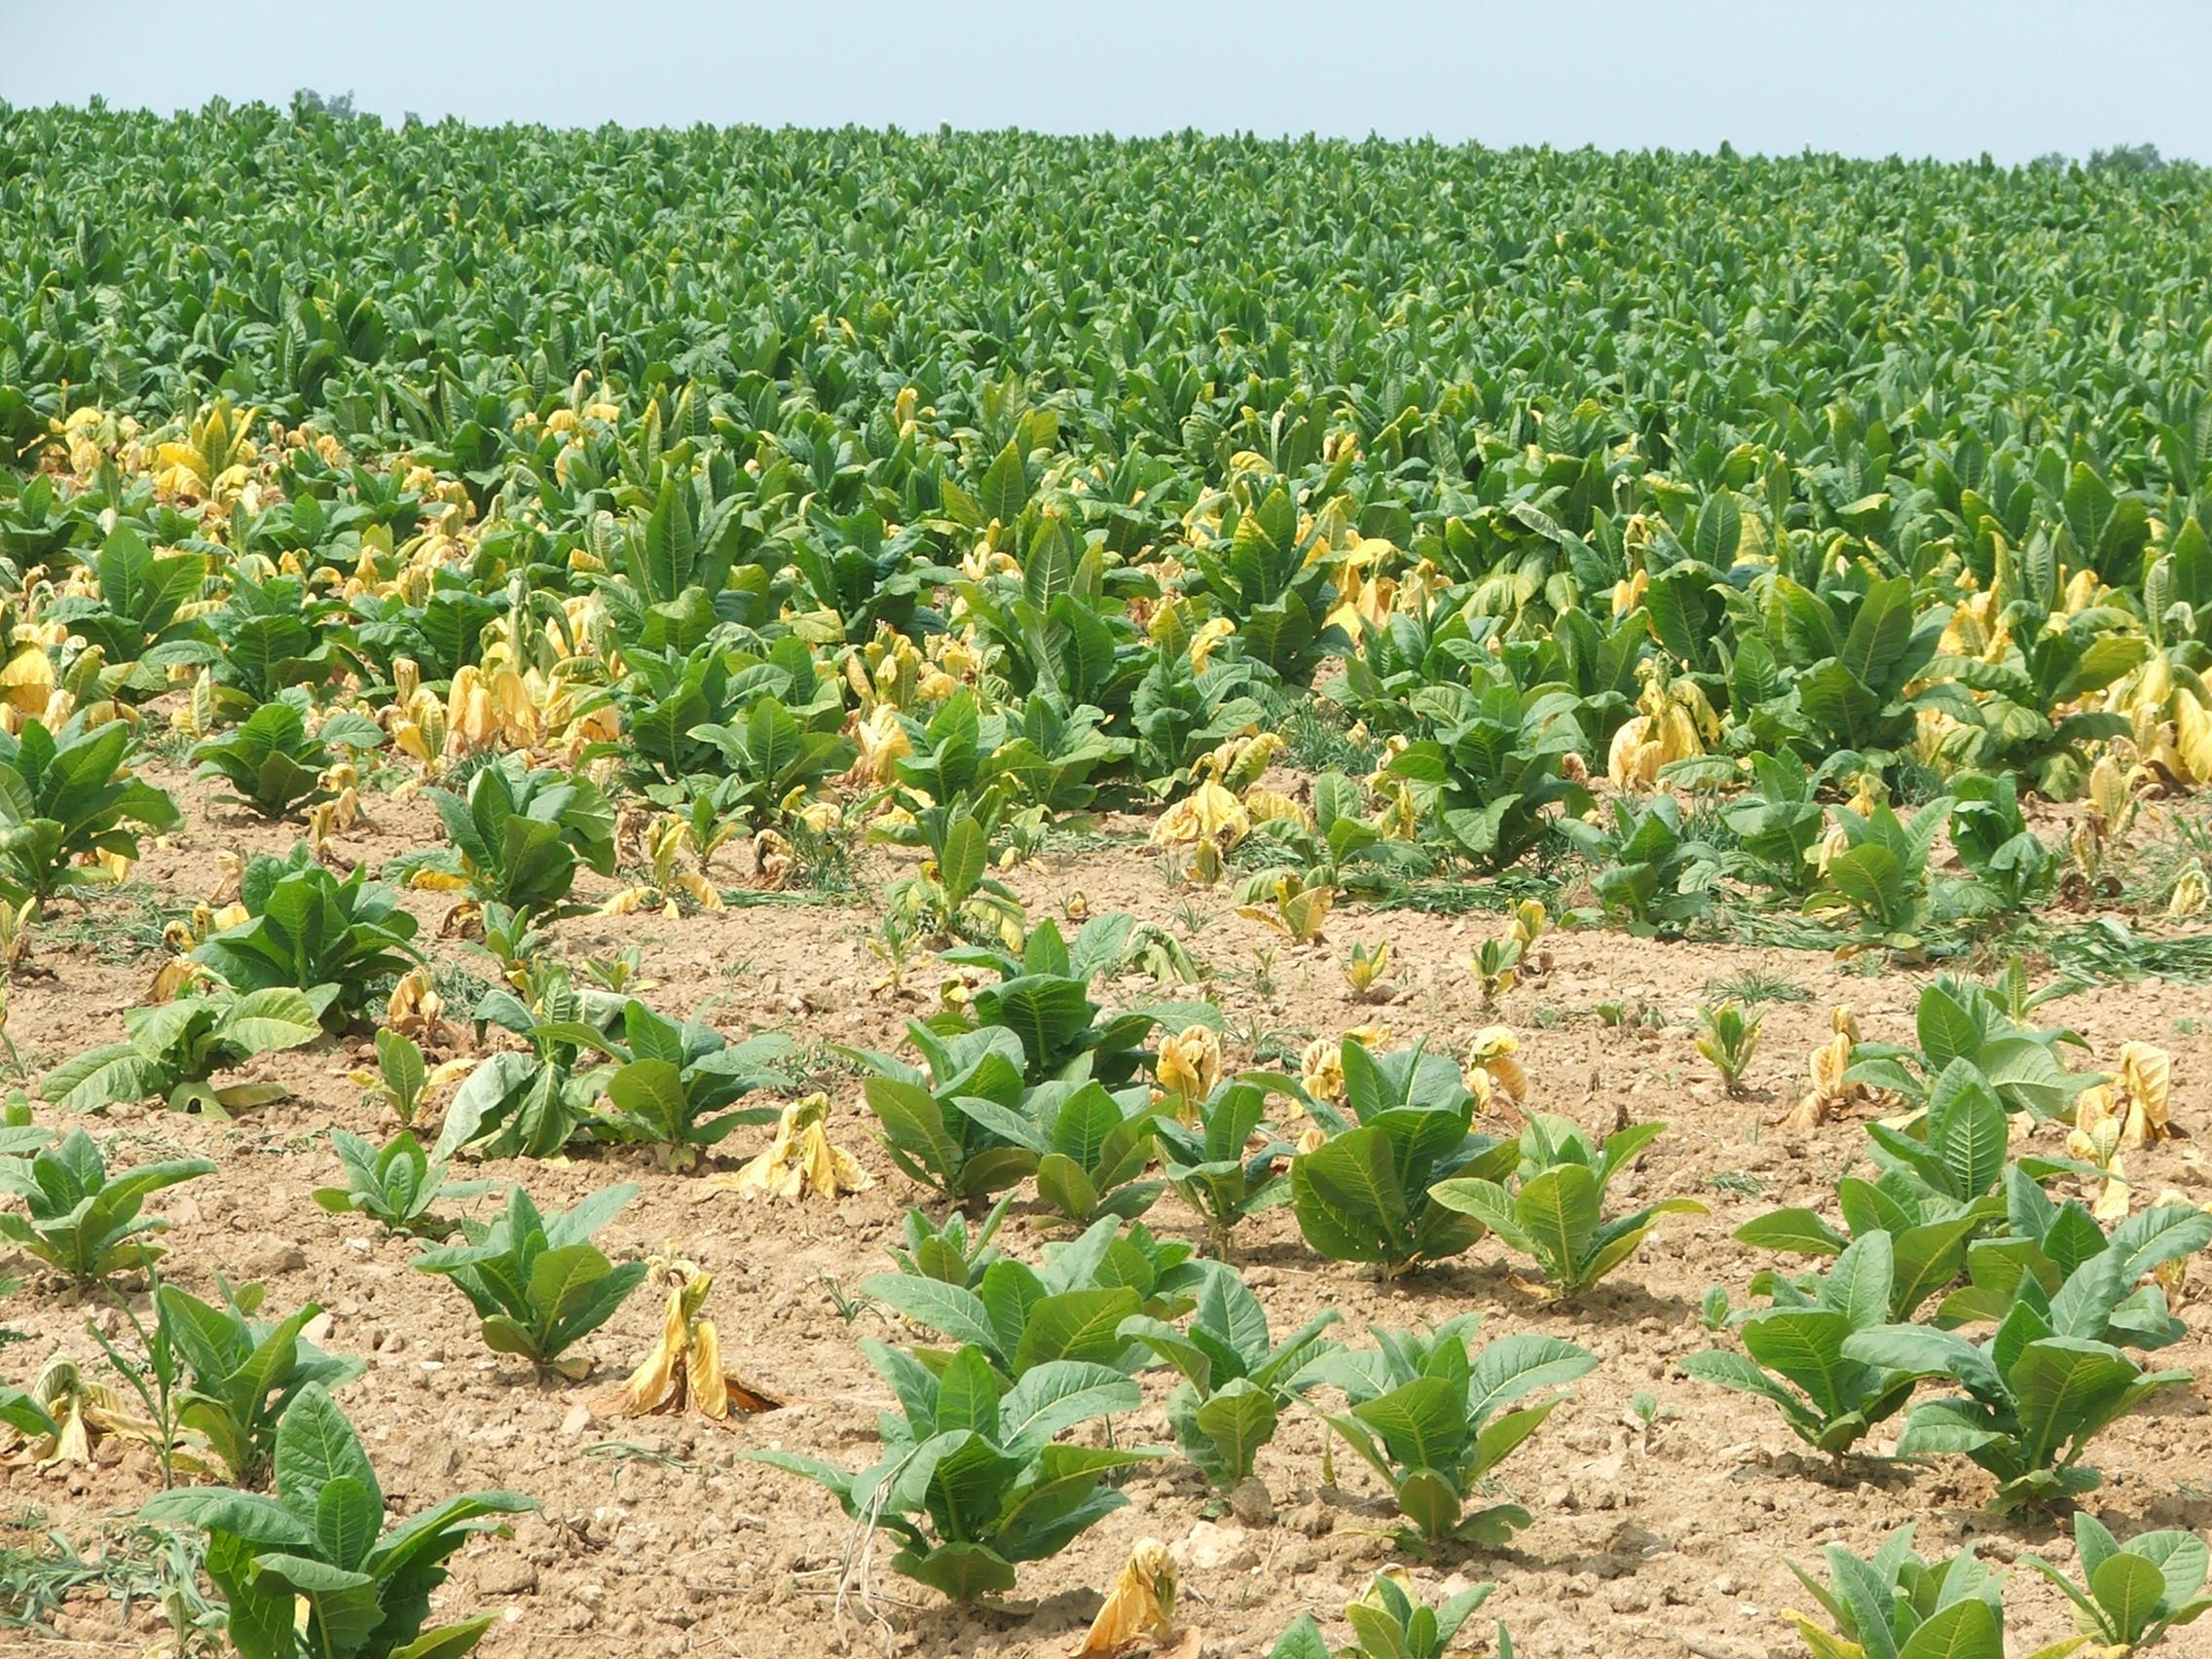 Tobacco plants affected by black shank may be scattered through portions of a field or distributed evenly in low, wet areas of the field. (Photo: Kenneth Seebold, UK)